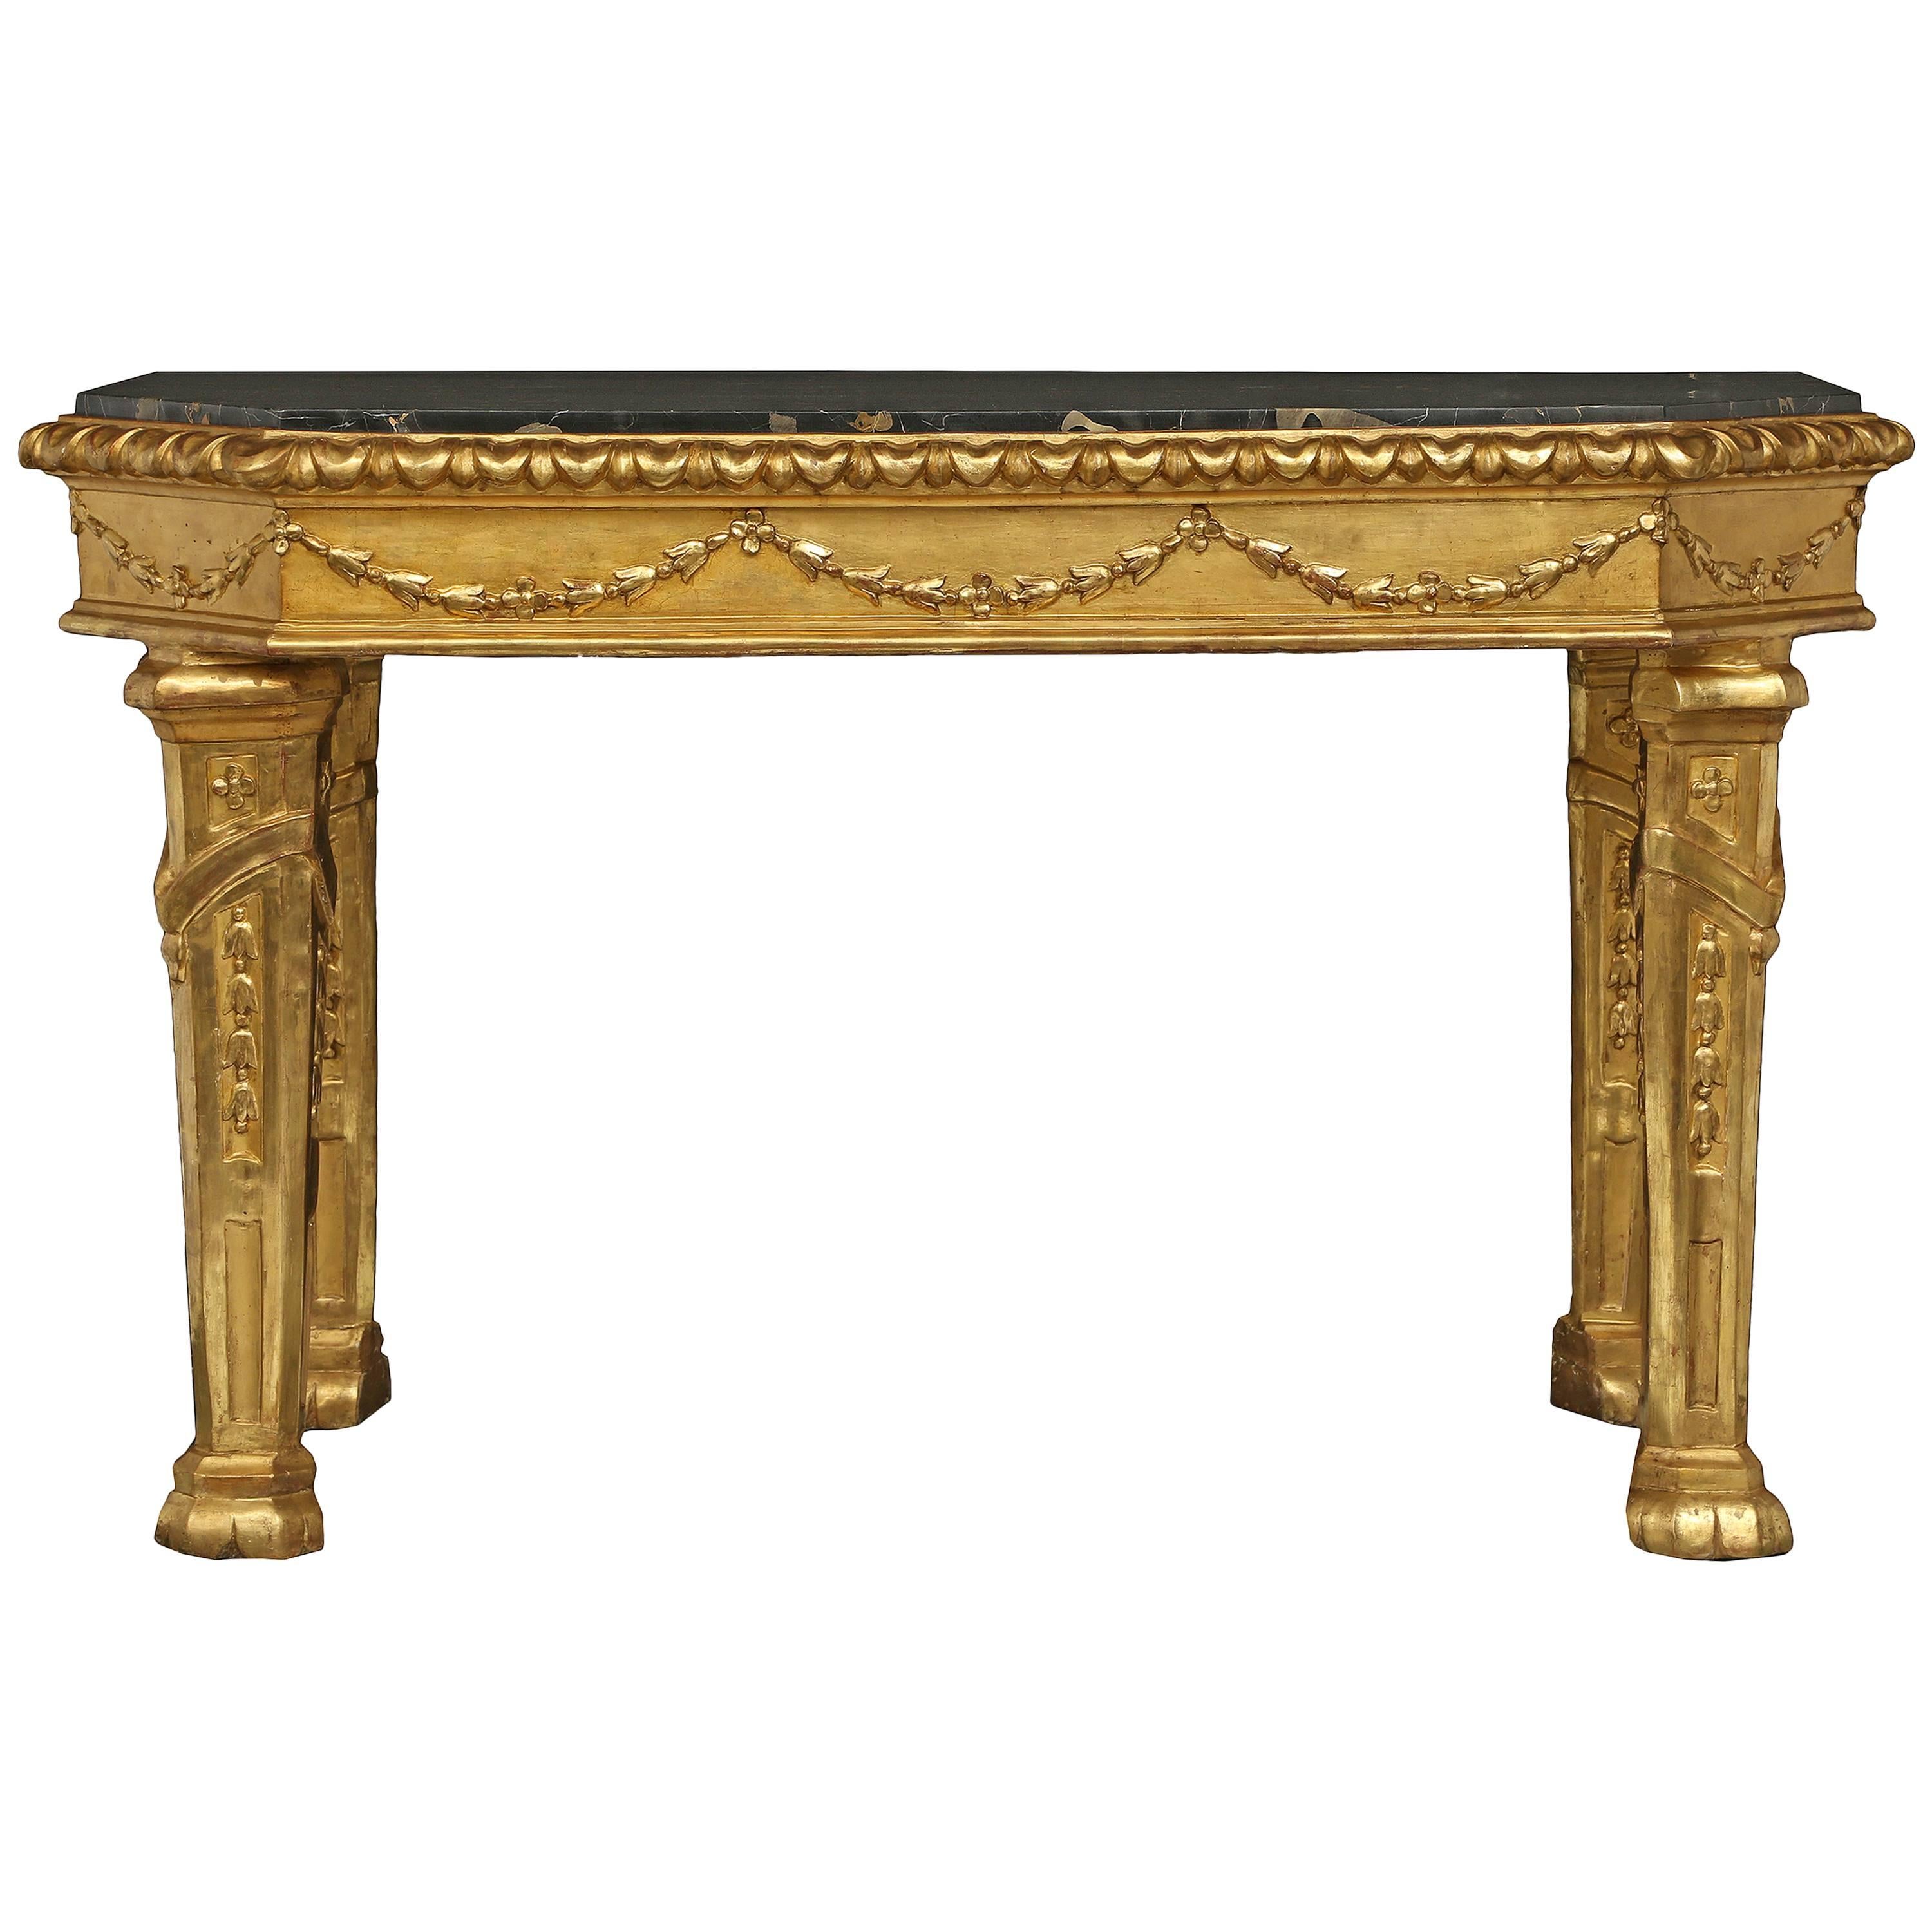 Italian 18th Century Louis XIV Period Giltwood and Marble Roman Console